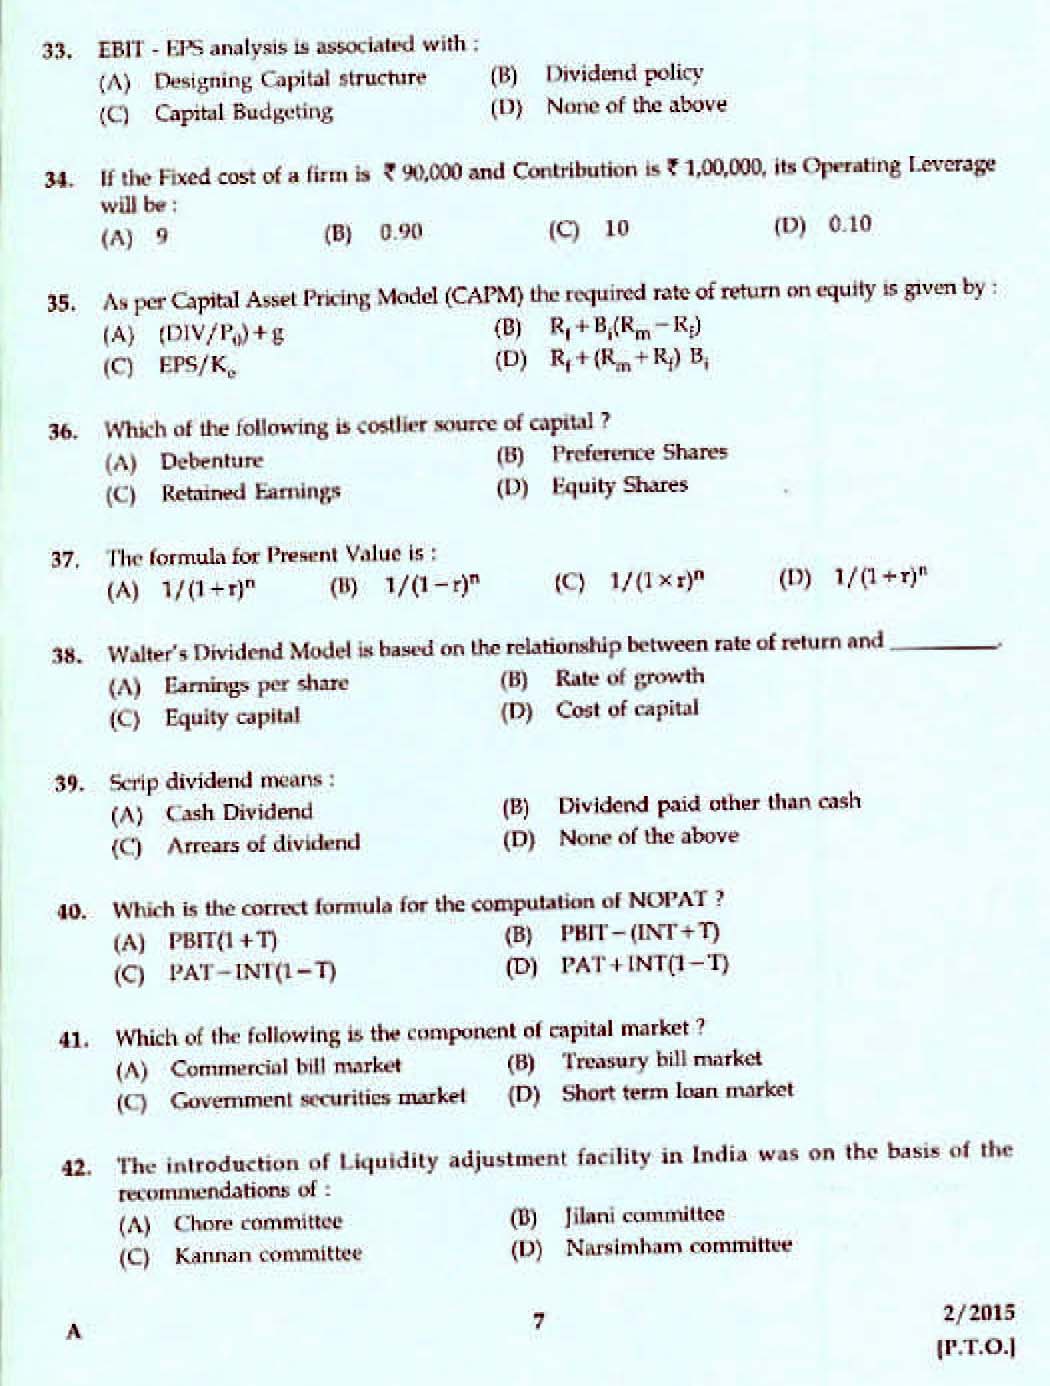 Kerala PSC Accounts Officer OMR Exam 2015 Question Paper Code 22015 5